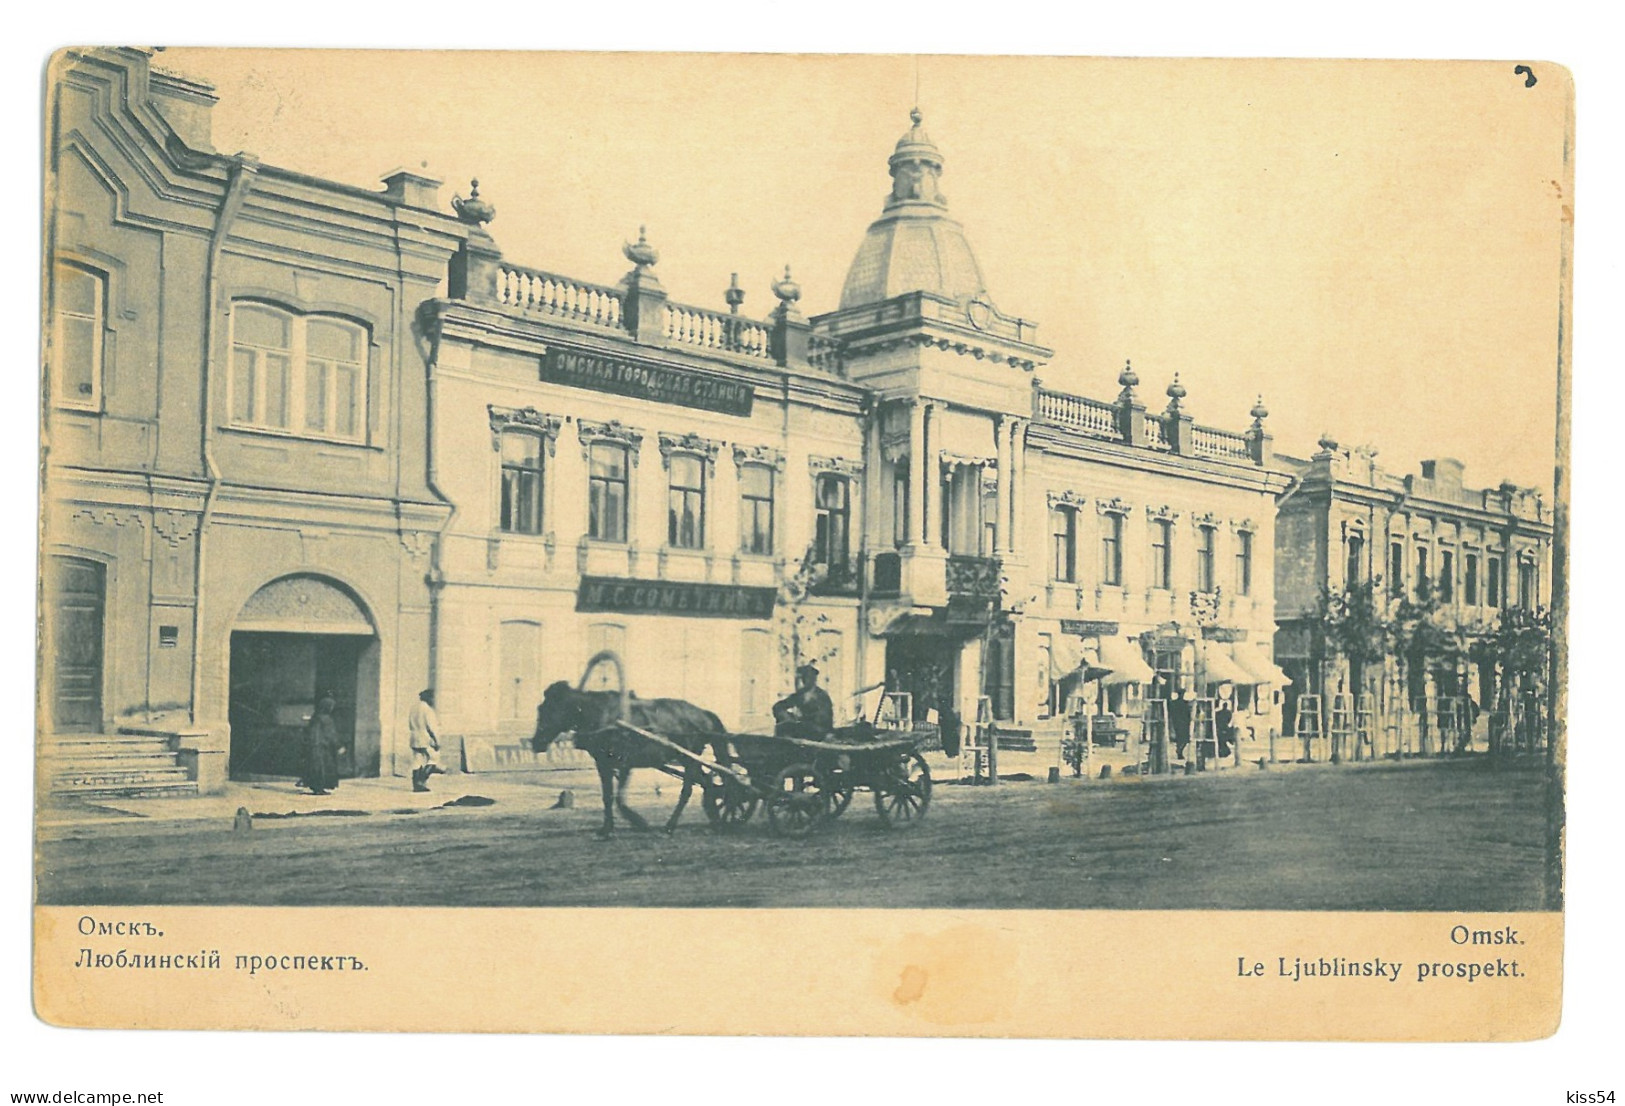 RUS 00 - 17924 OMSK, Railway Station, Russia - Old Postcard - Used - 1911 - Russland